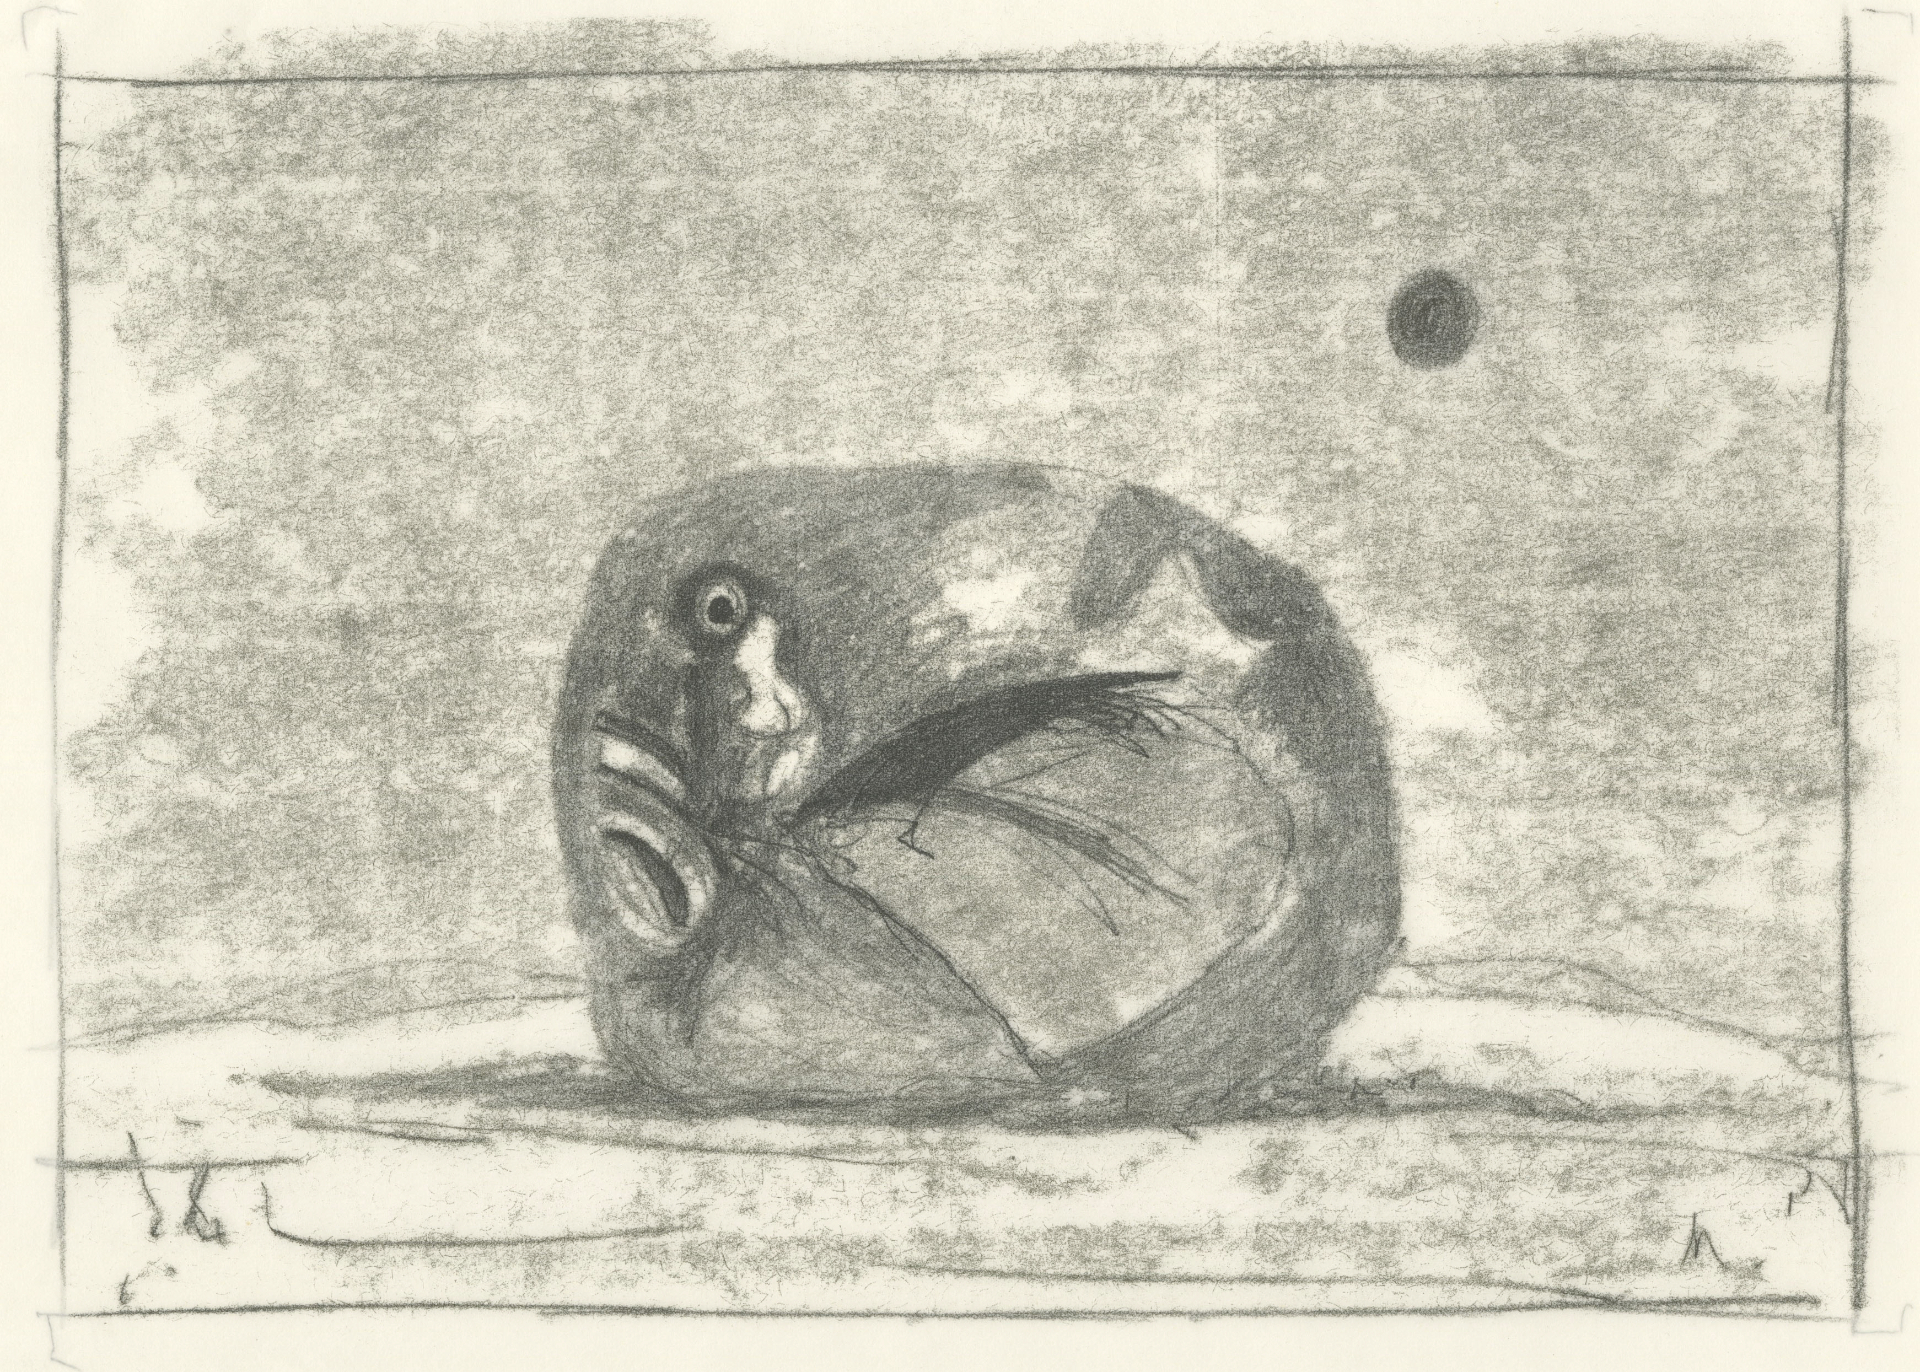 Black and white print of rock-like creature